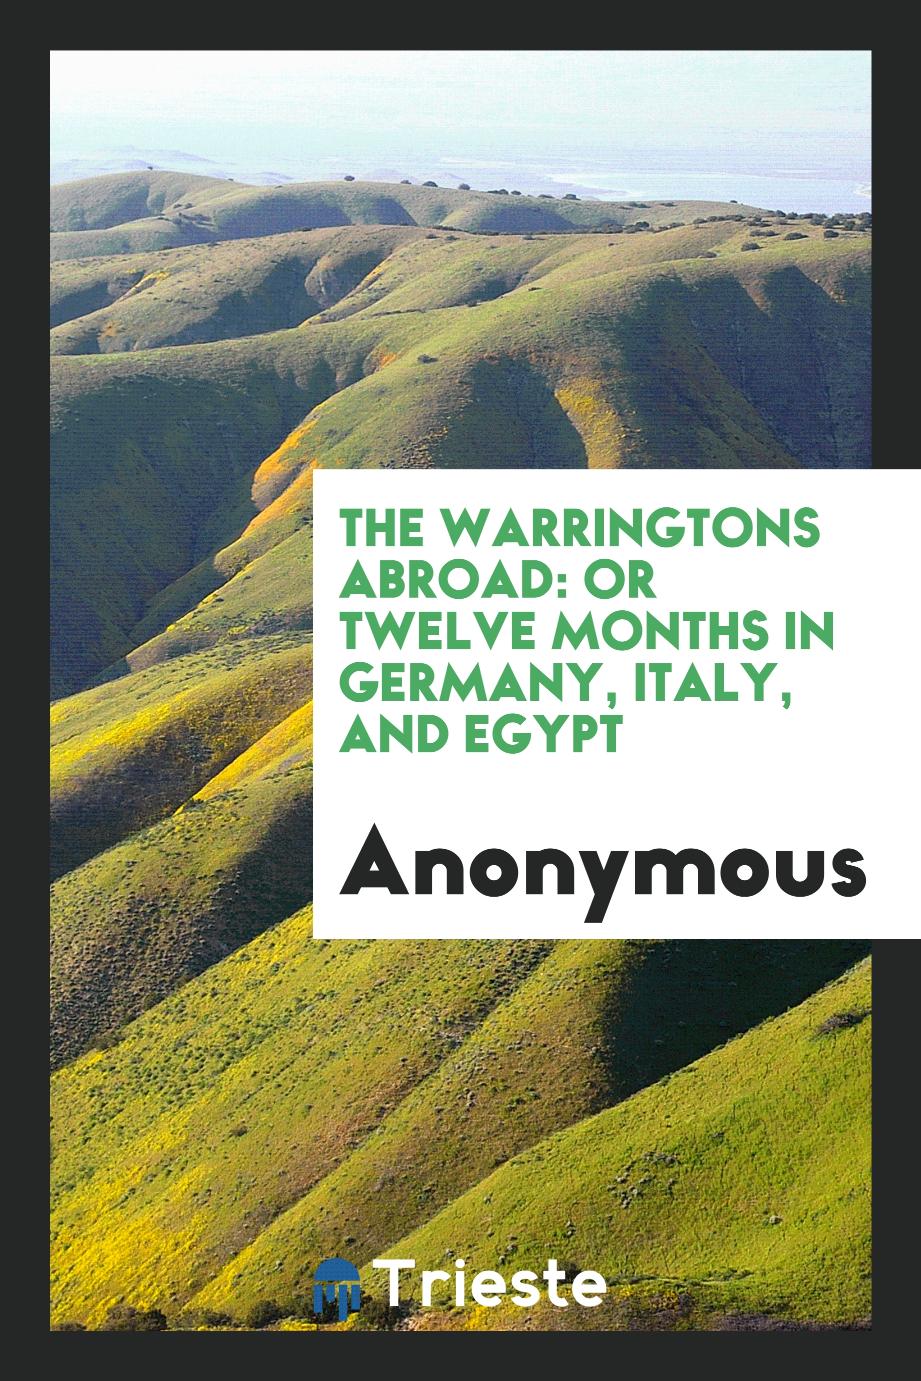 The Warringtons Abroad: Or Twelve Months in Germany, Italy, and Egypt